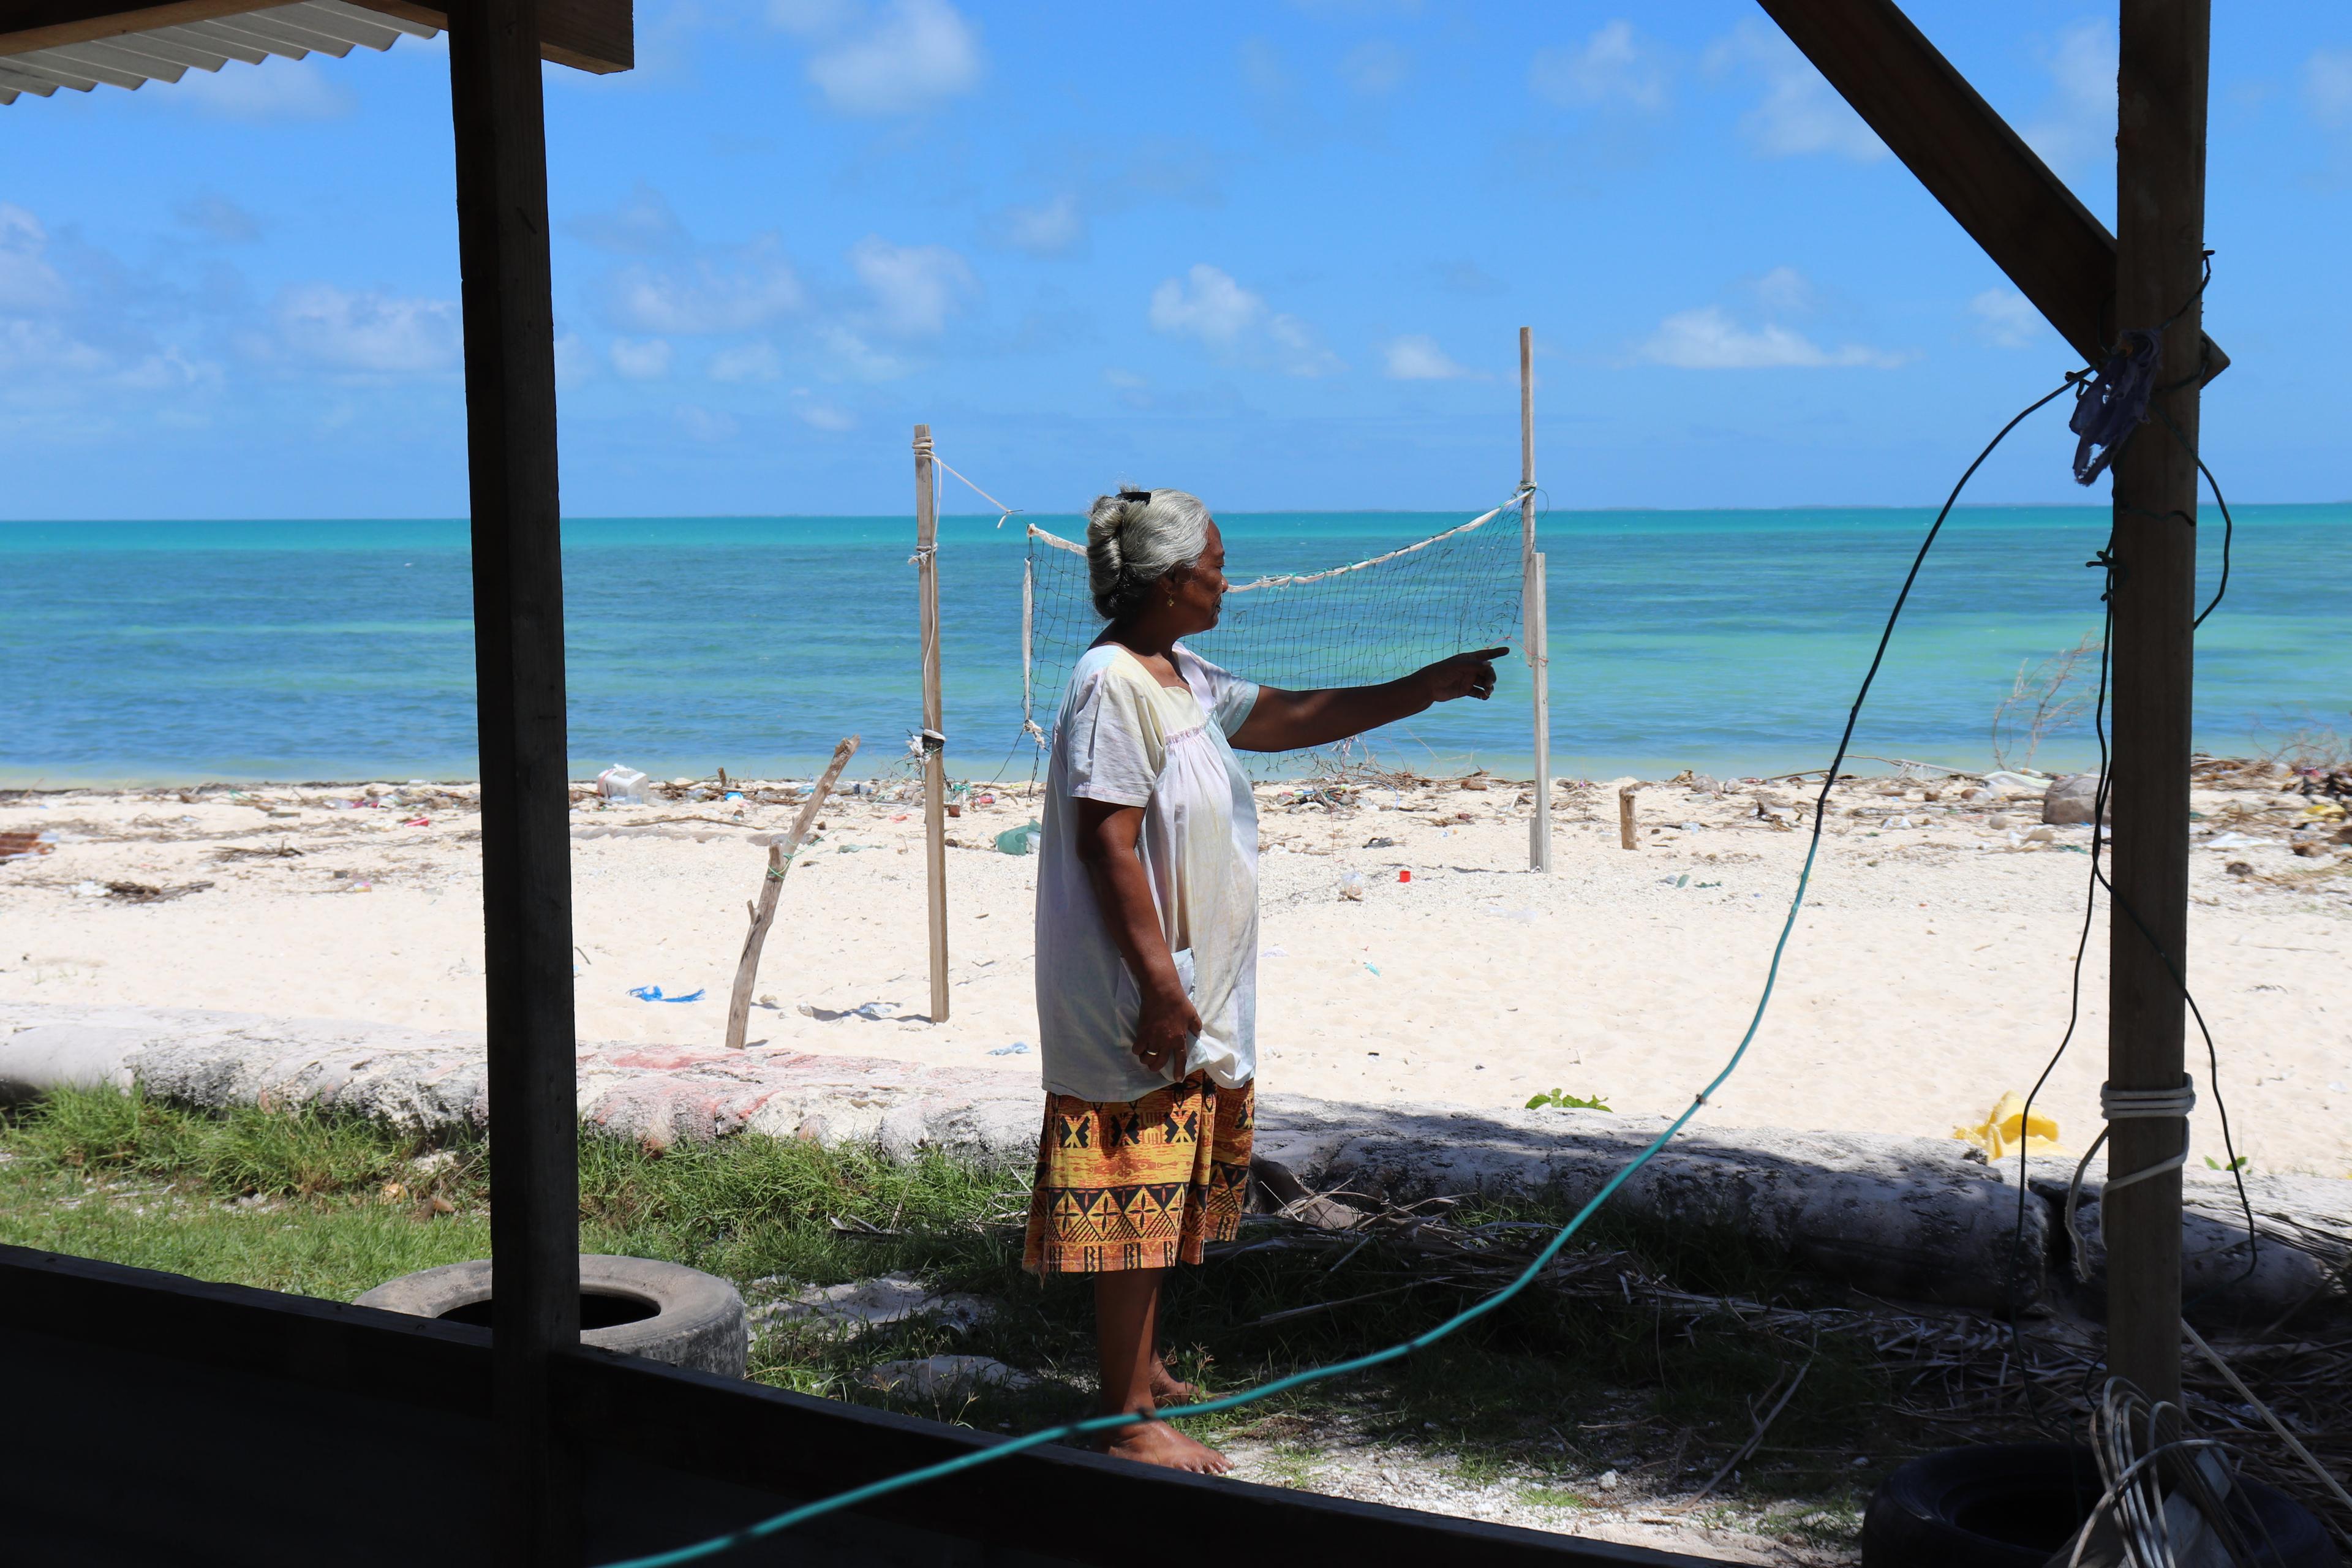 Effects of climate change in Kiribati, where MSF has opened a new project. In Kiribati, MSF supports the Ministry of Health and Medical Services. 